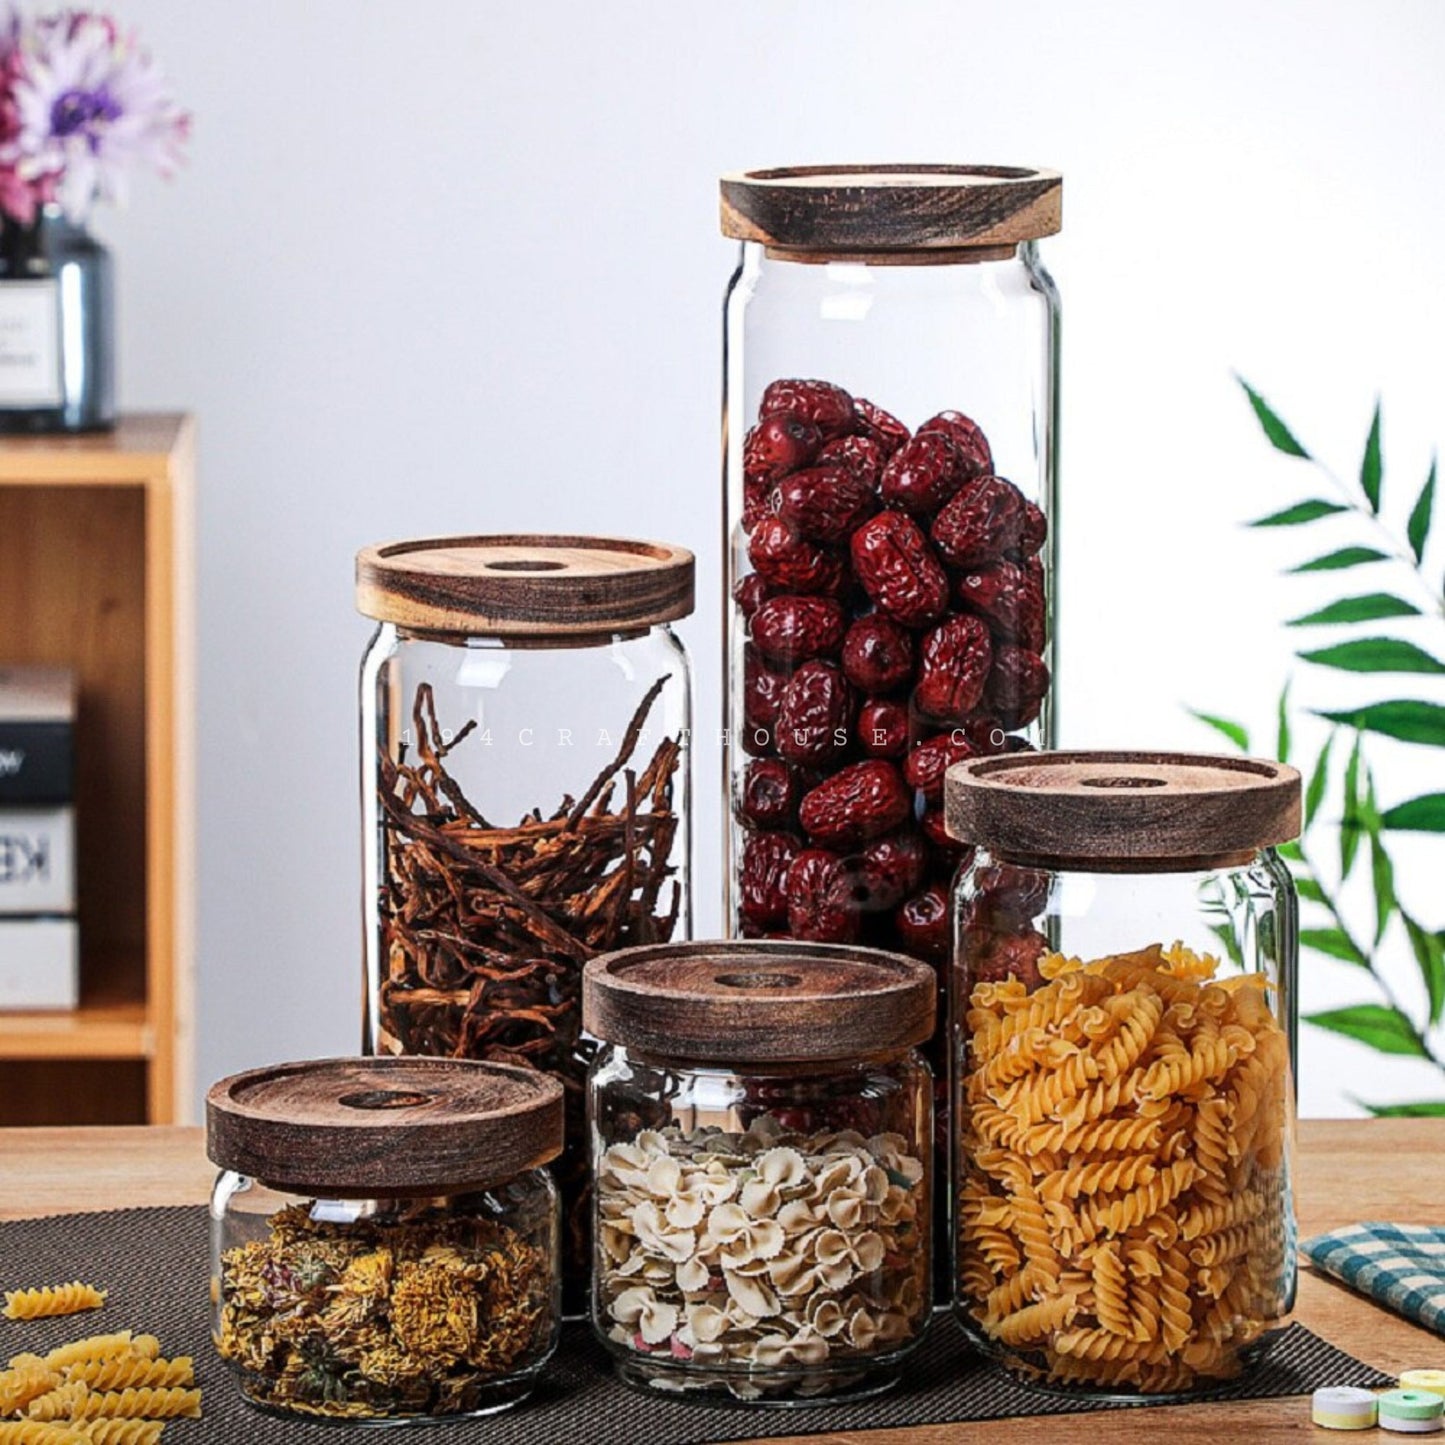 250ml Small Glass Container Wood Airtight Seal Engraved Lid | Food Storage & Organization